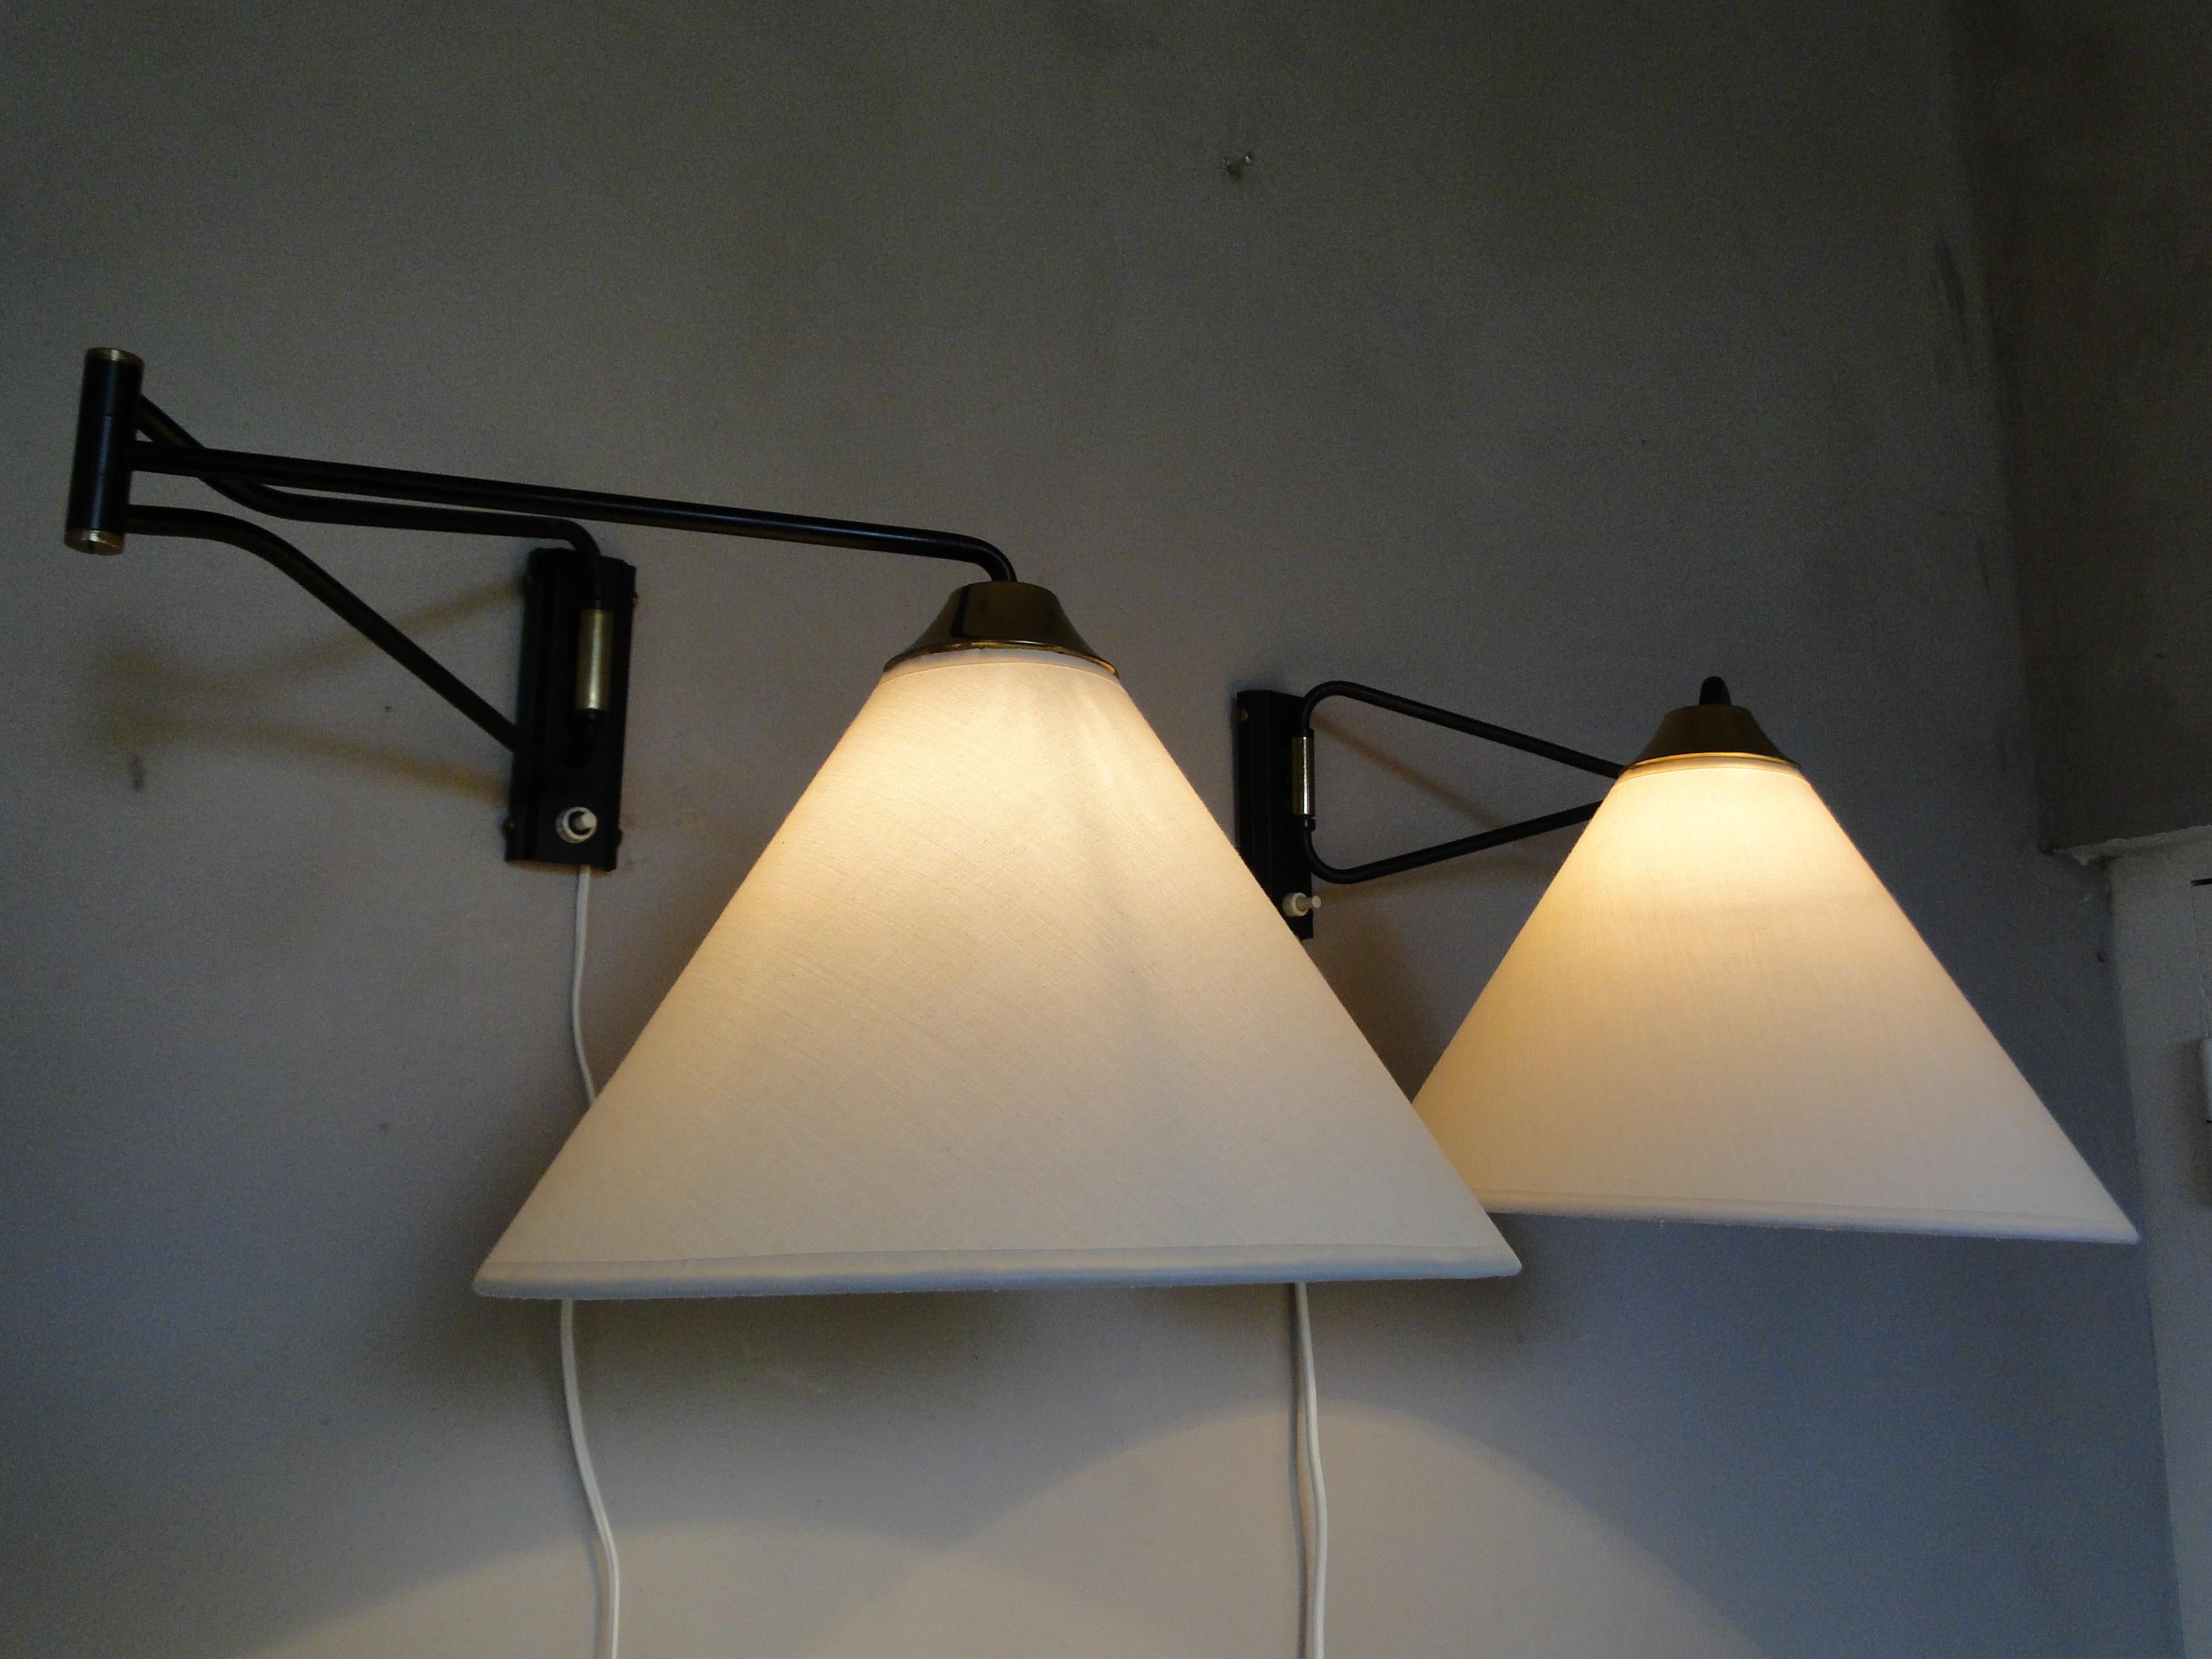  Pair of Rene Mathieu Swing Arm Sconces Wall lamp French Adjustable  Lunel Arlus For Sale 6